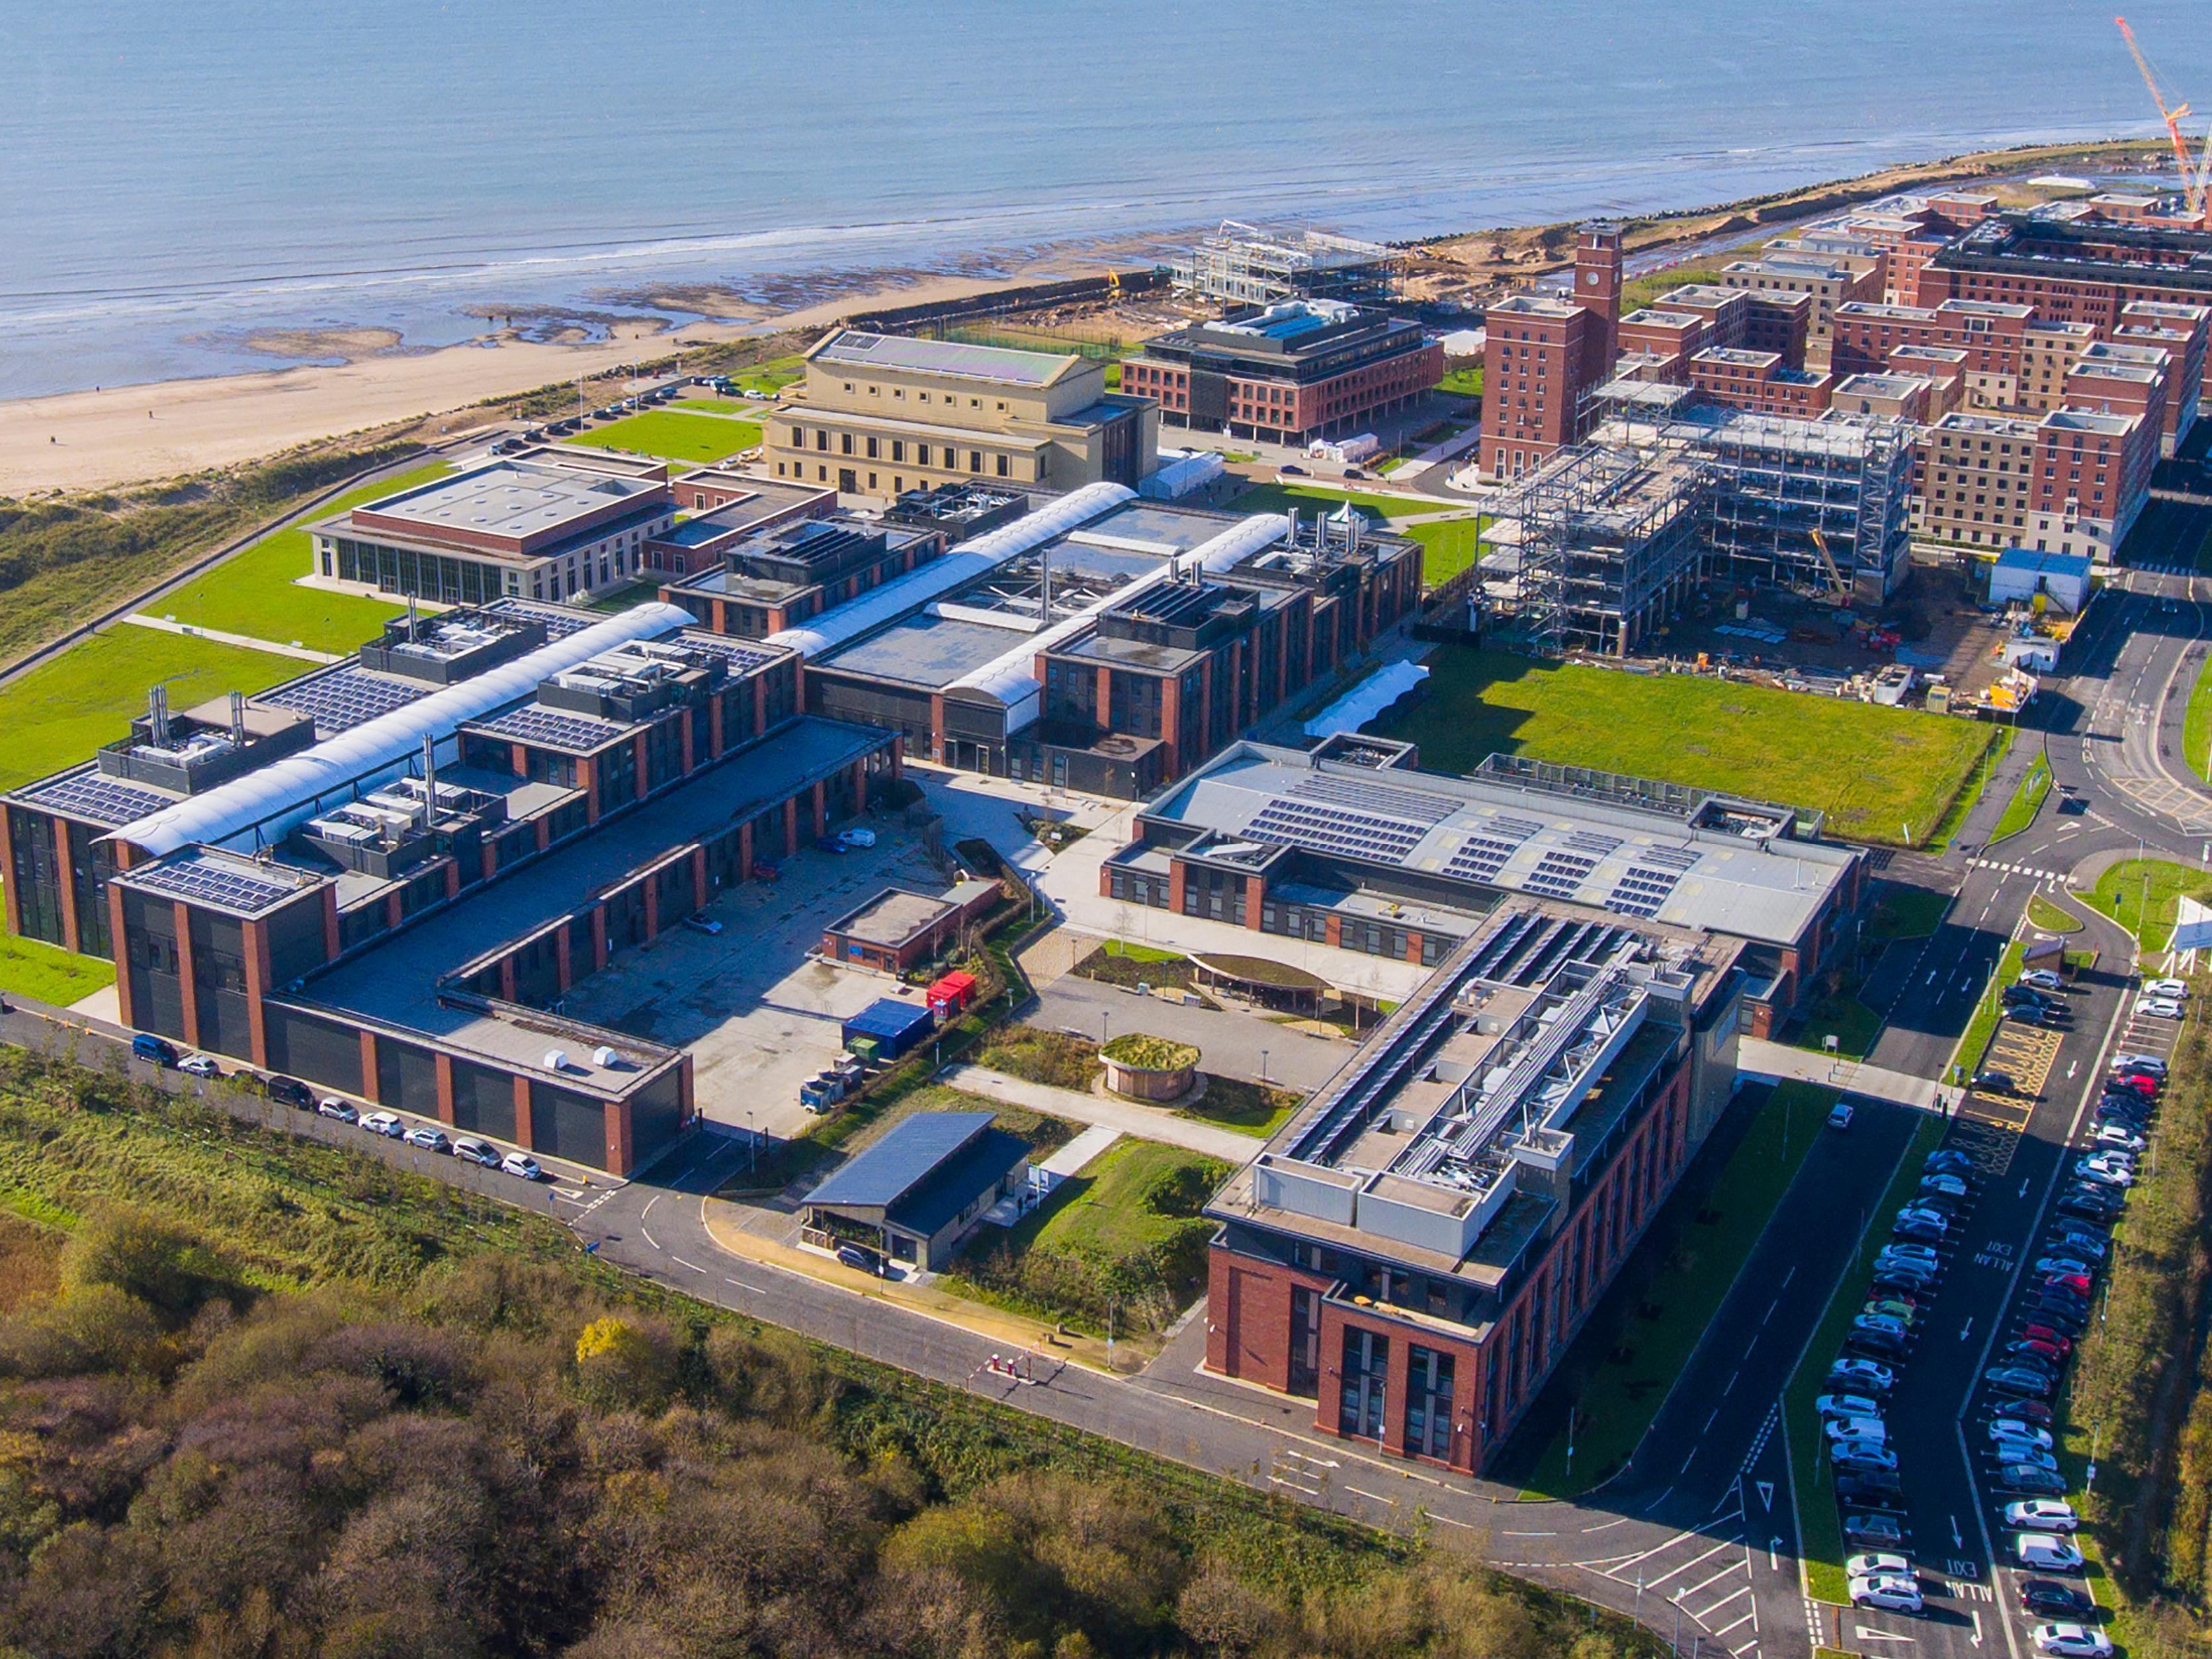 Aerial shot of Swanse Bay campus with sea in the background